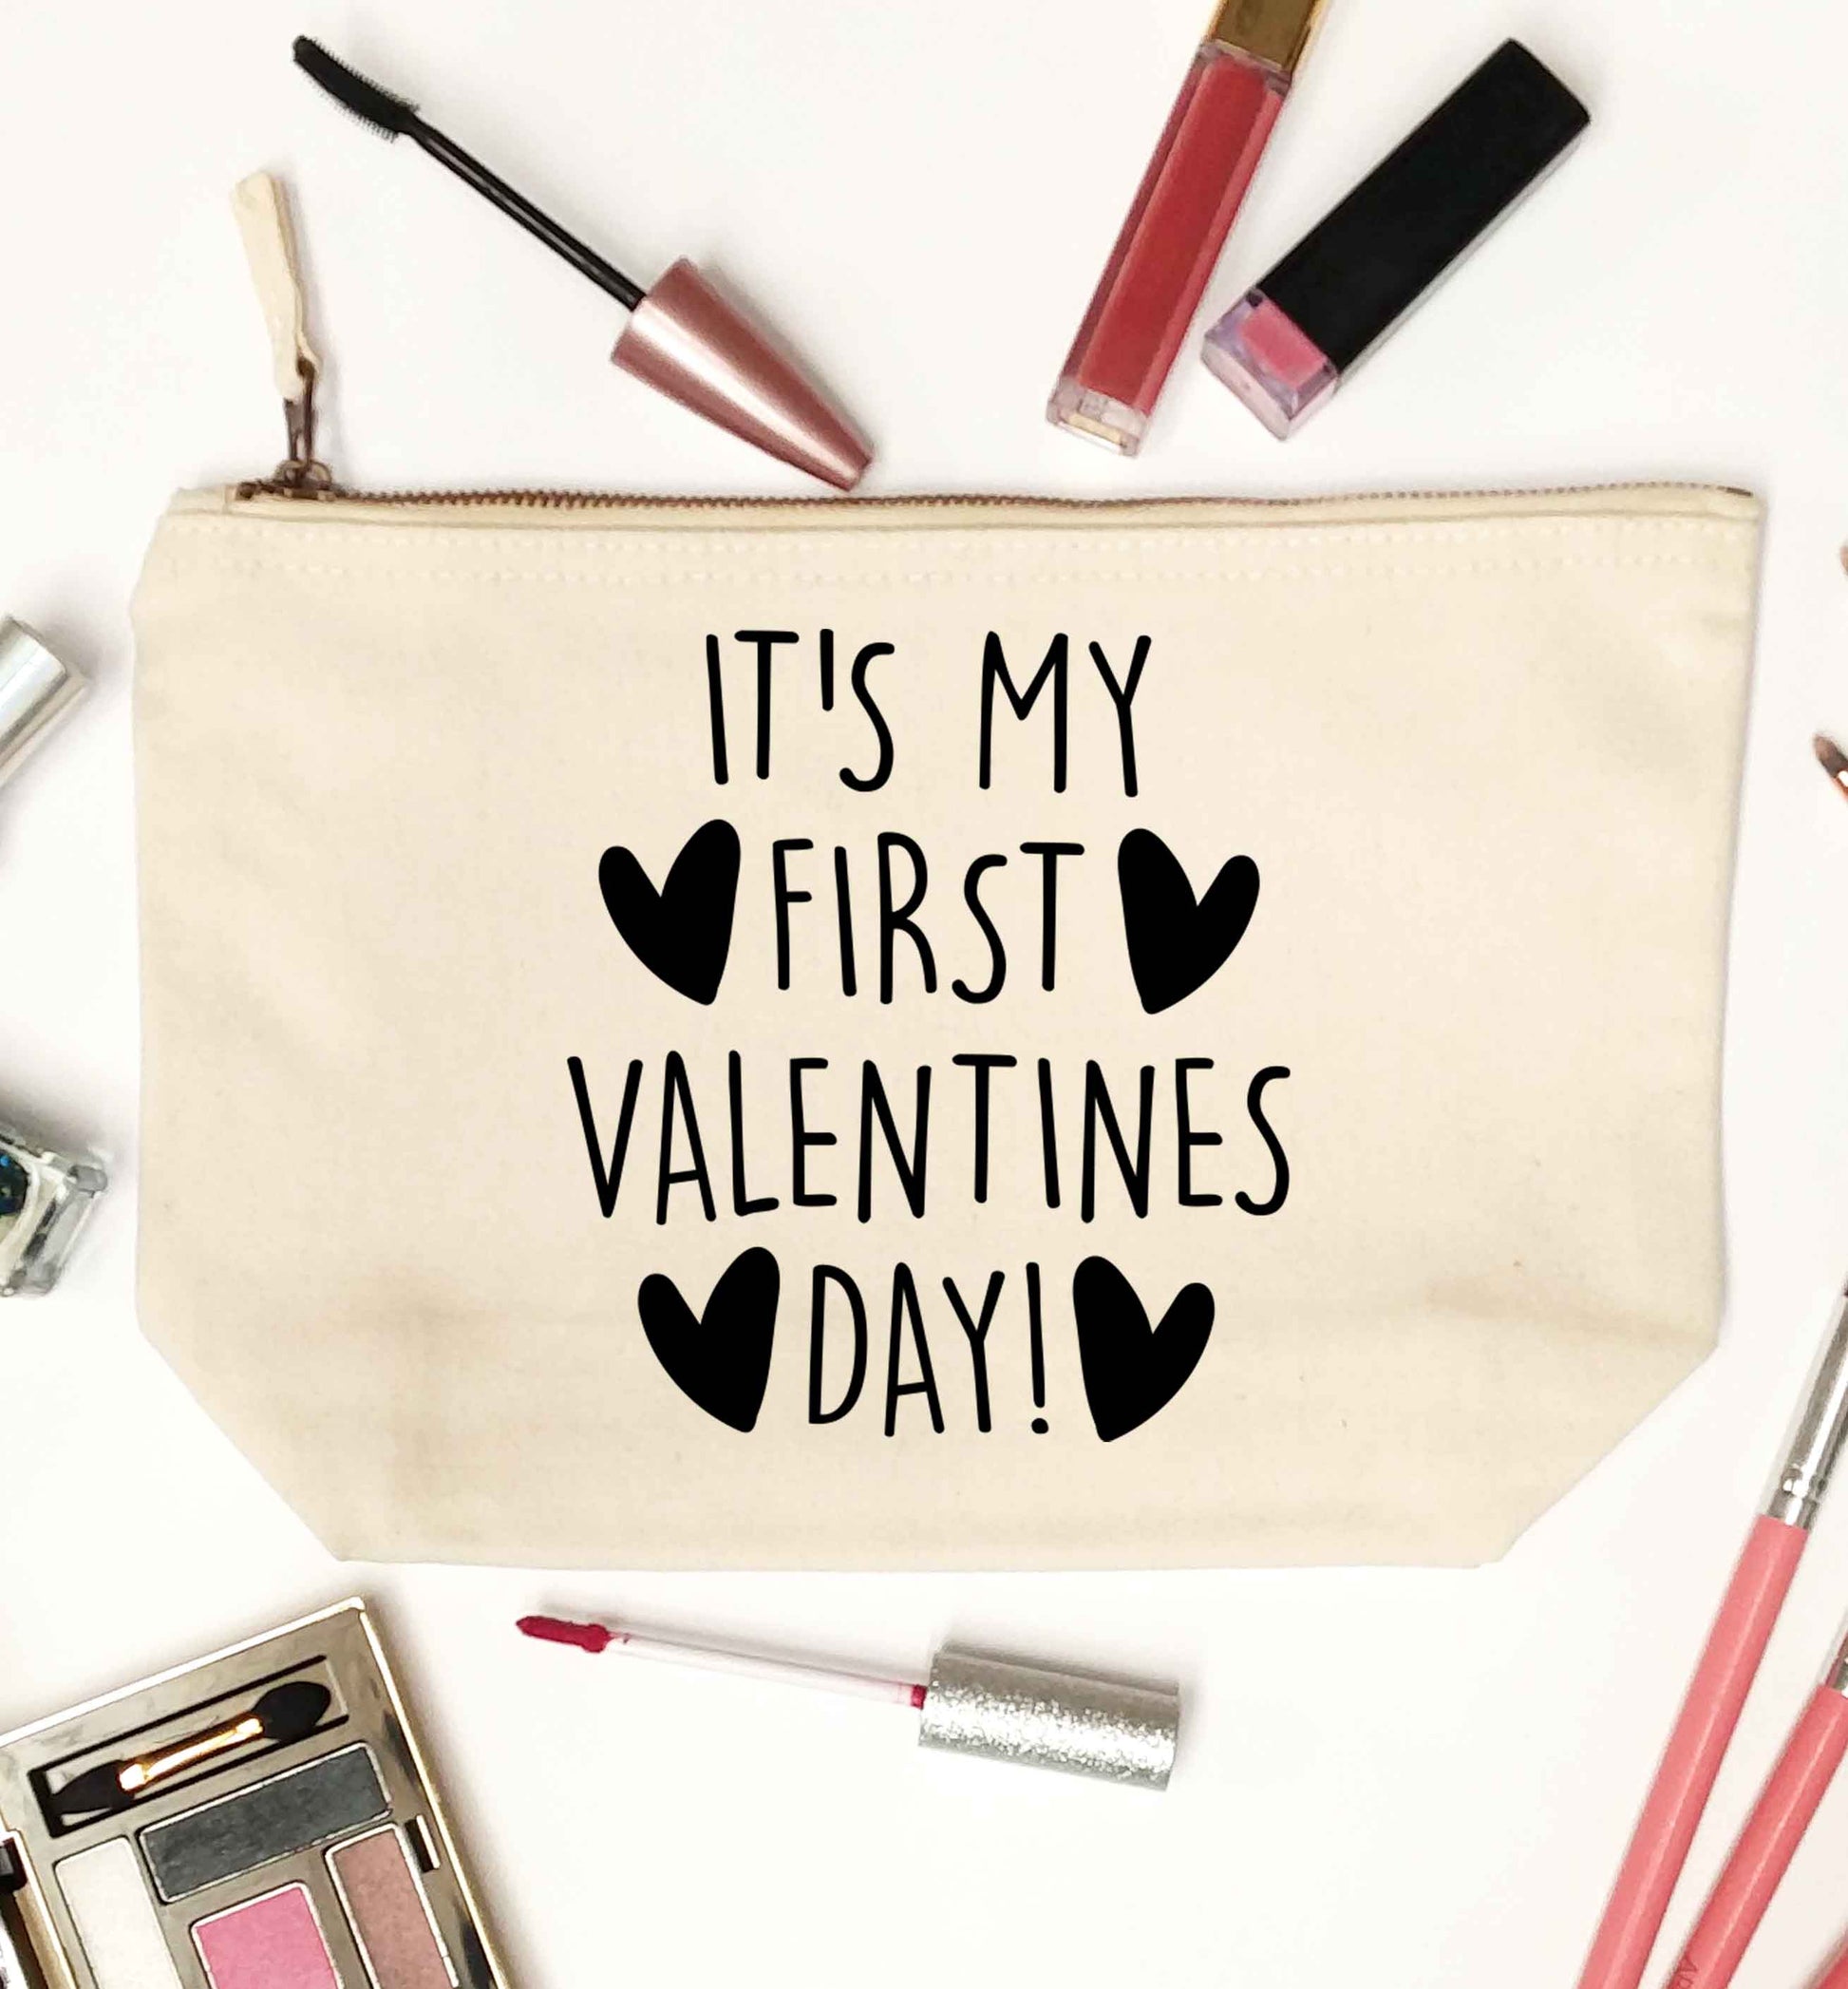 It's my first valentines day! natural makeup bag